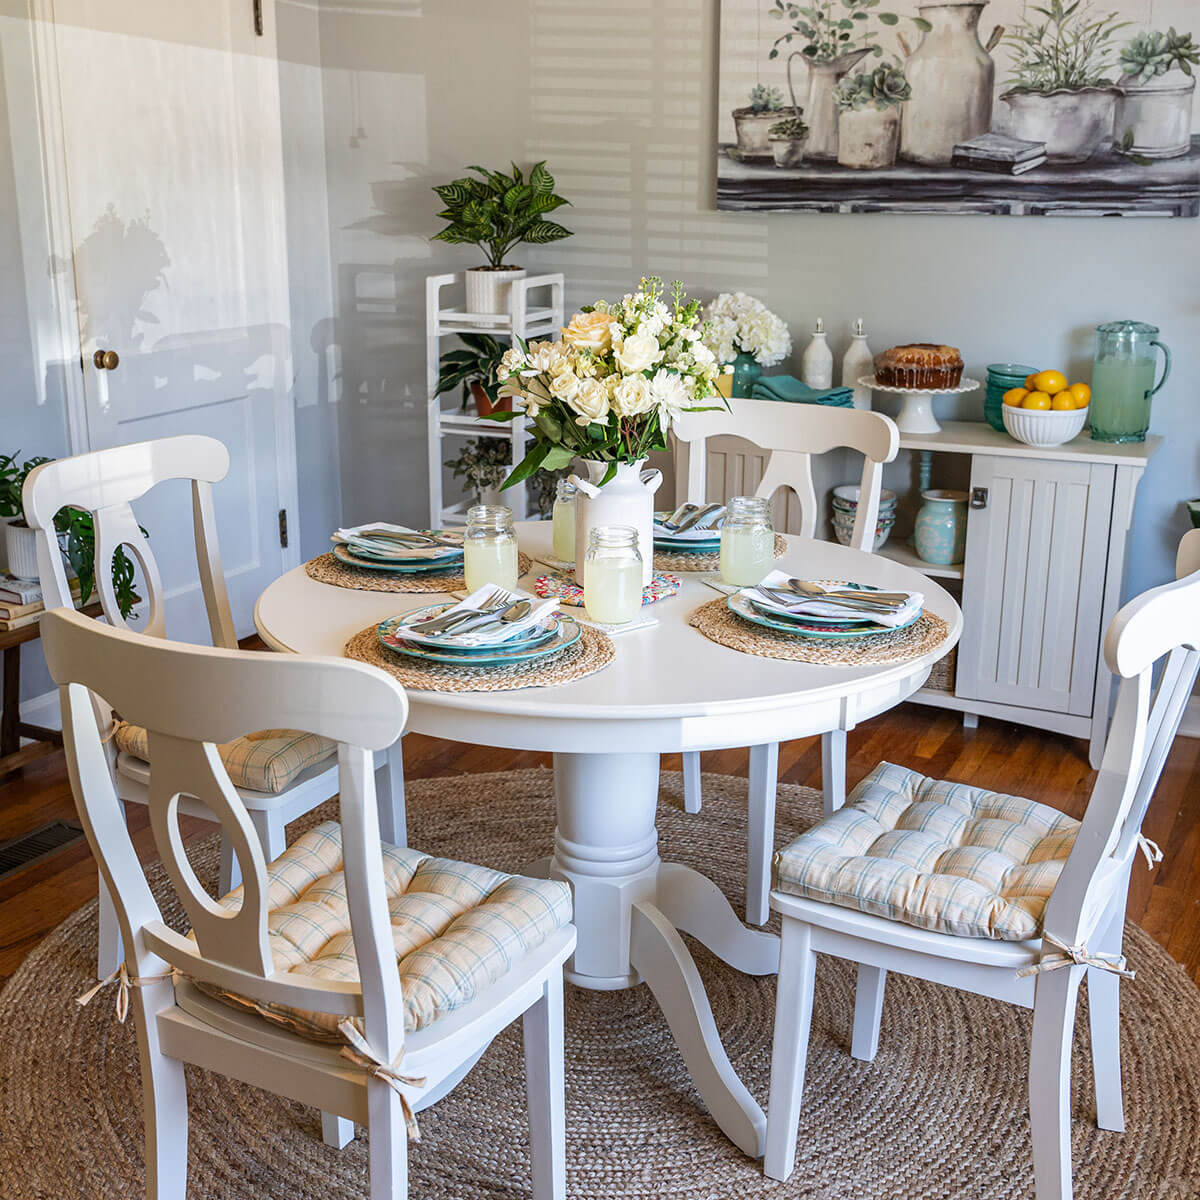 yellow plaid dining chair cushions on white dining chairs in farmhouse kitchen with lemons and aqua